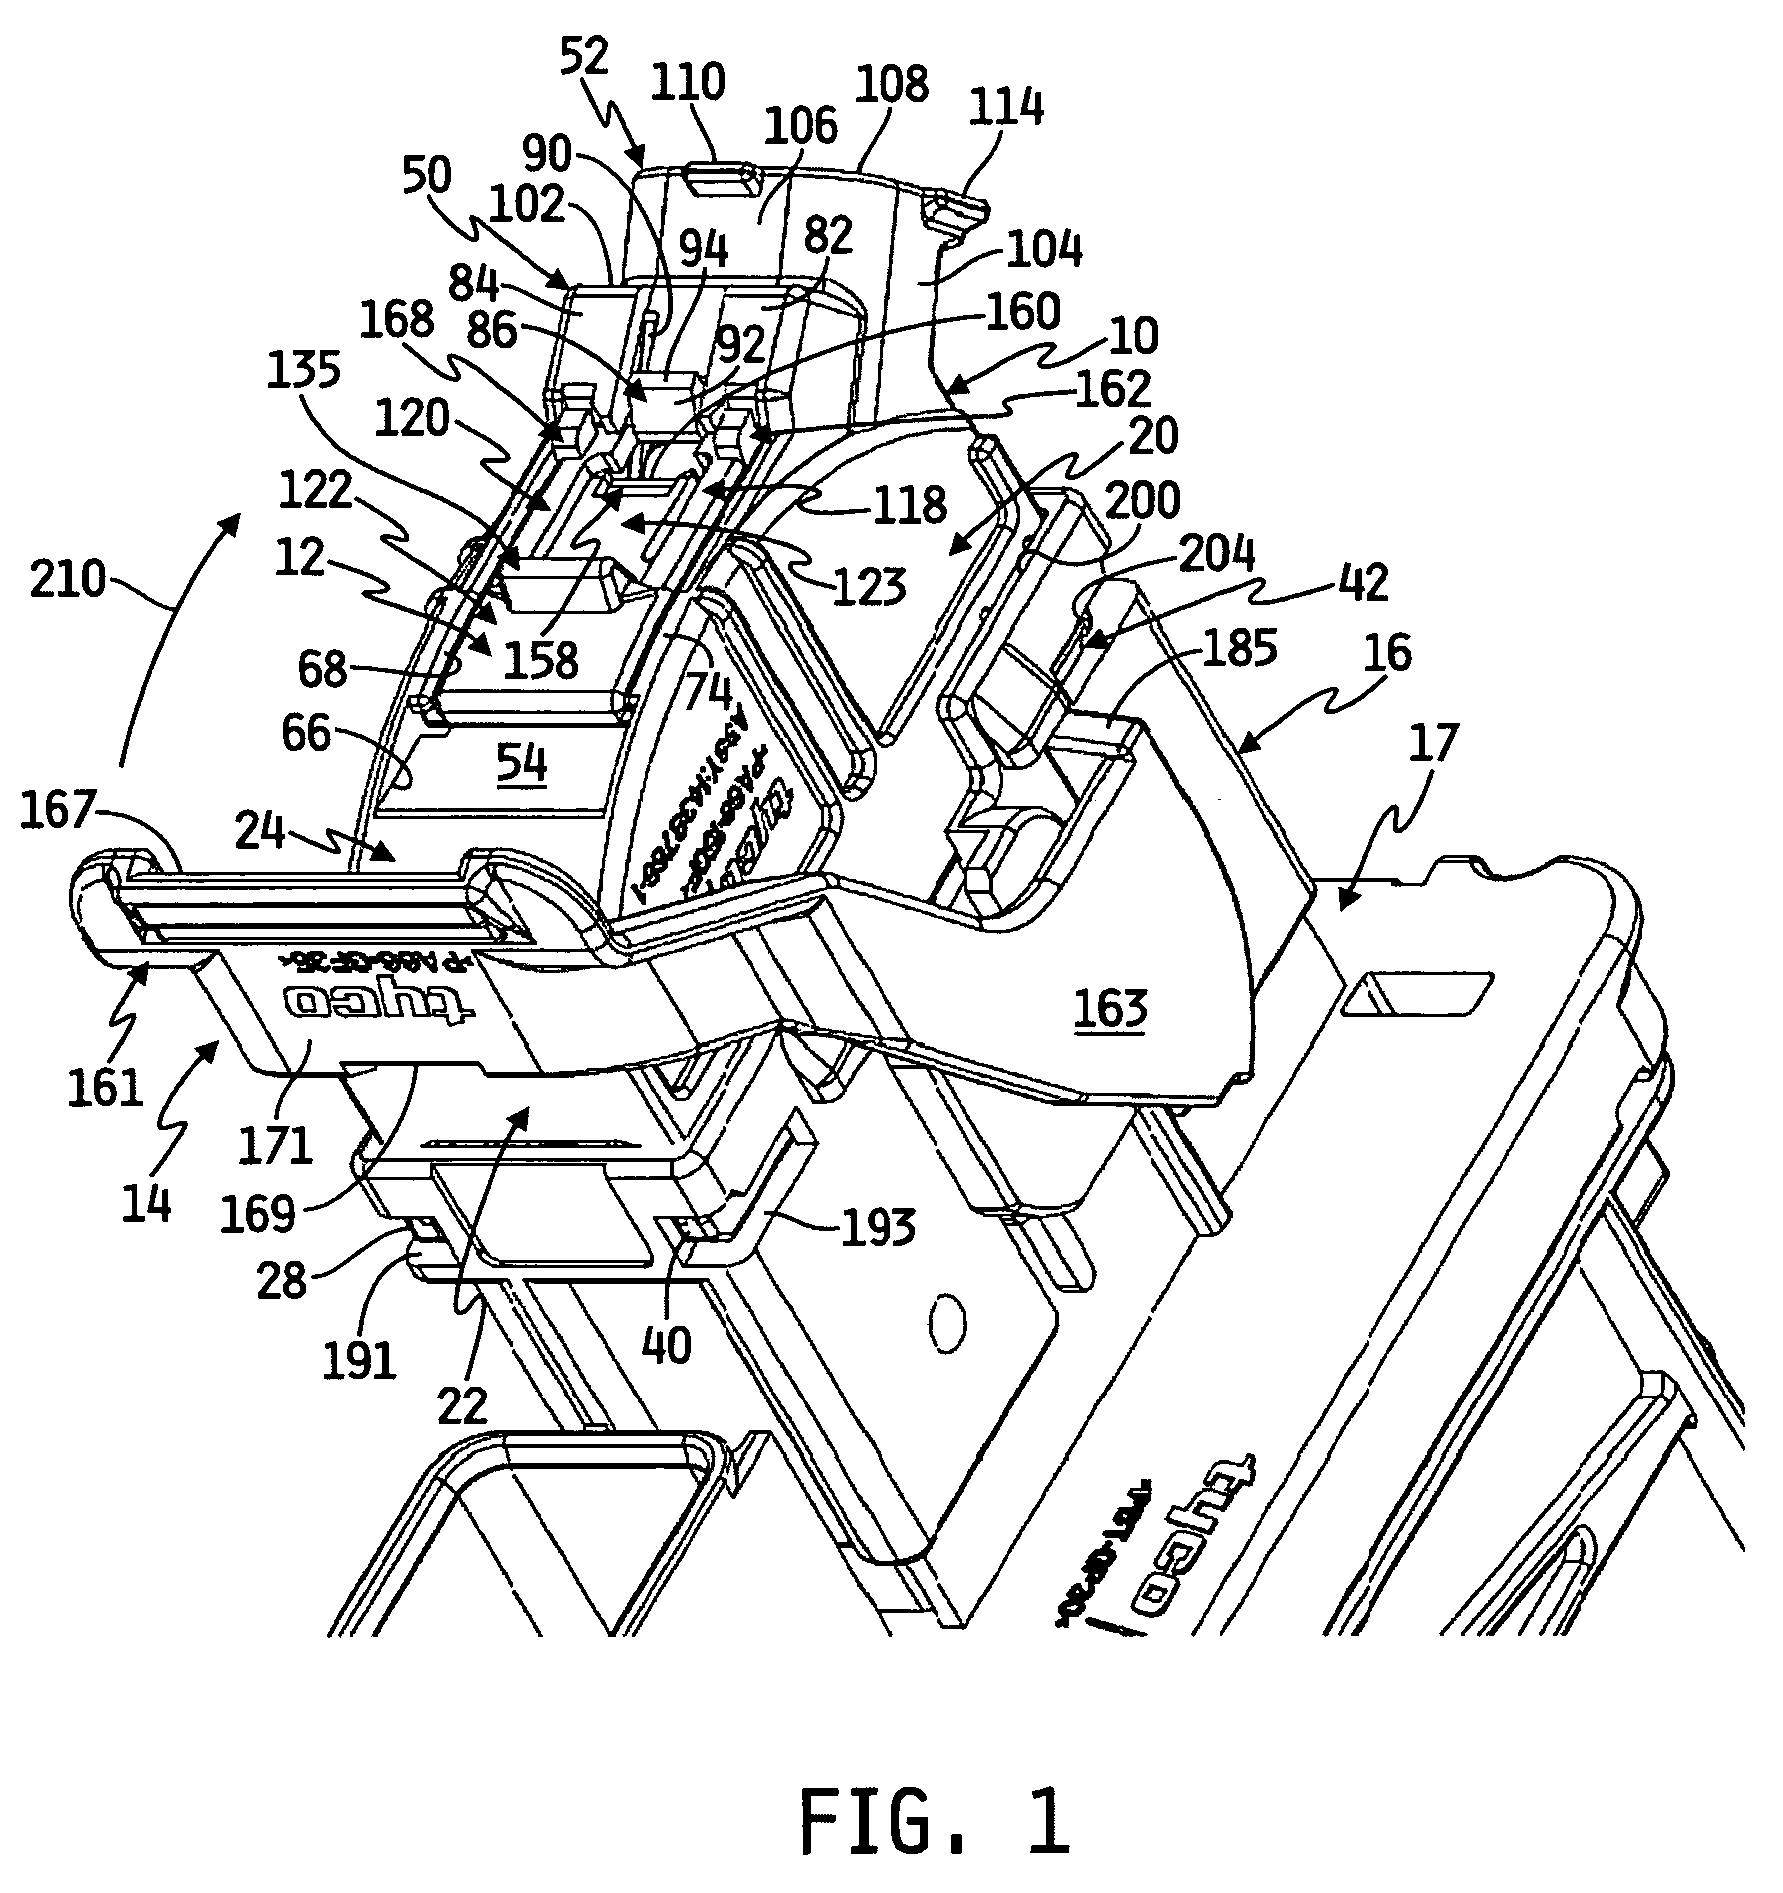 Lever mated connector assembly with a position assurance device